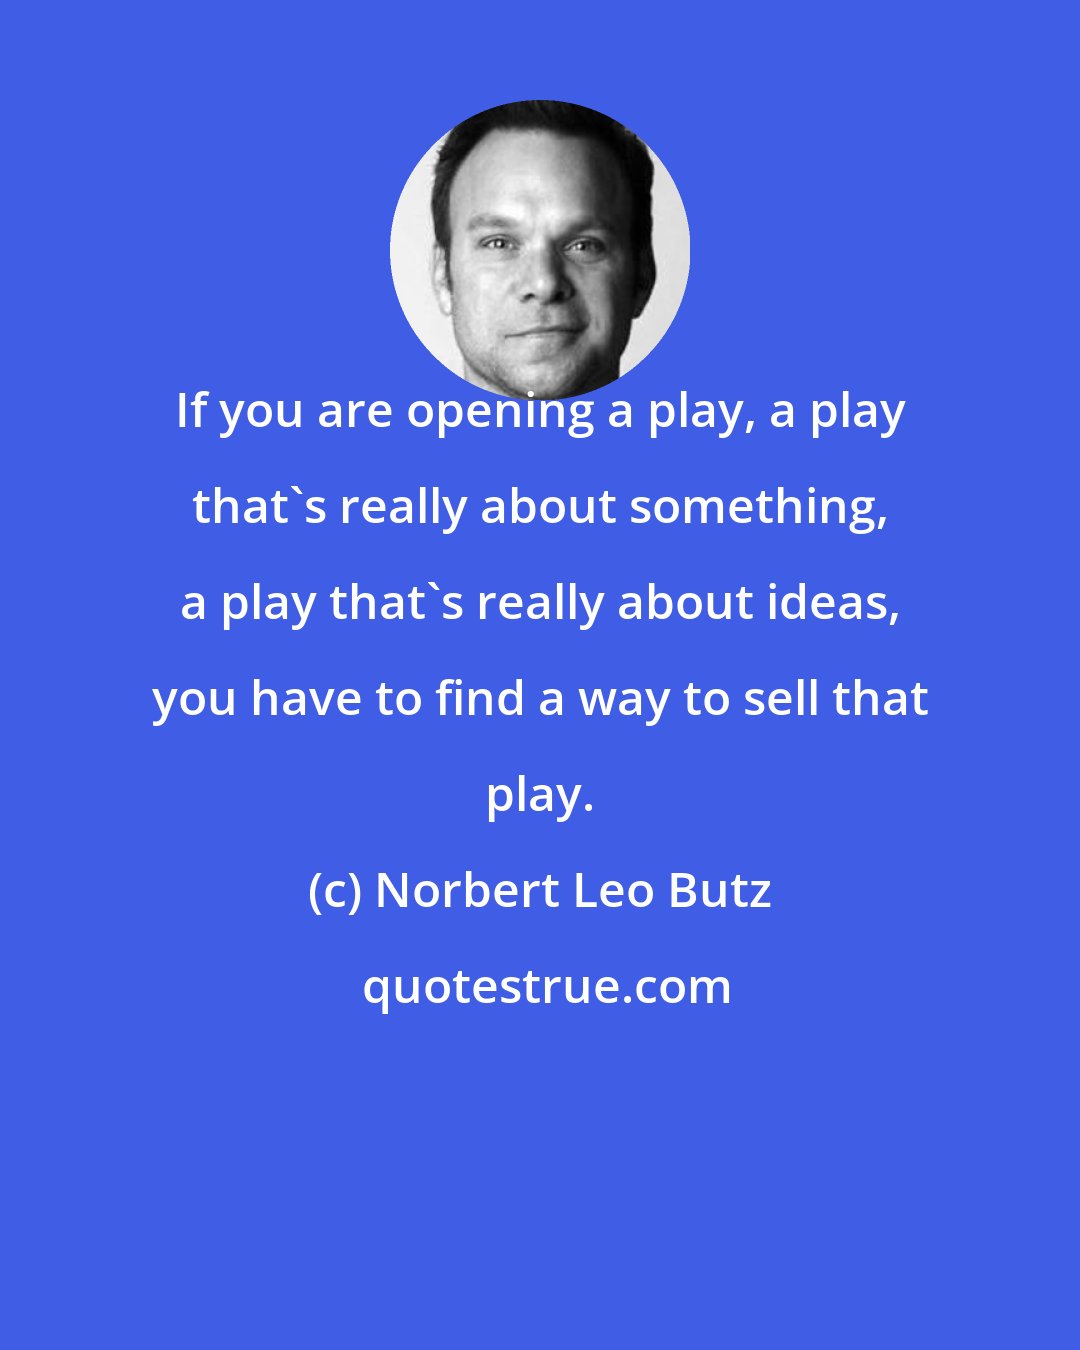 Norbert Leo Butz: If you are opening a play, a play that's really about something, a play that's really about ideas, you have to find a way to sell that play.